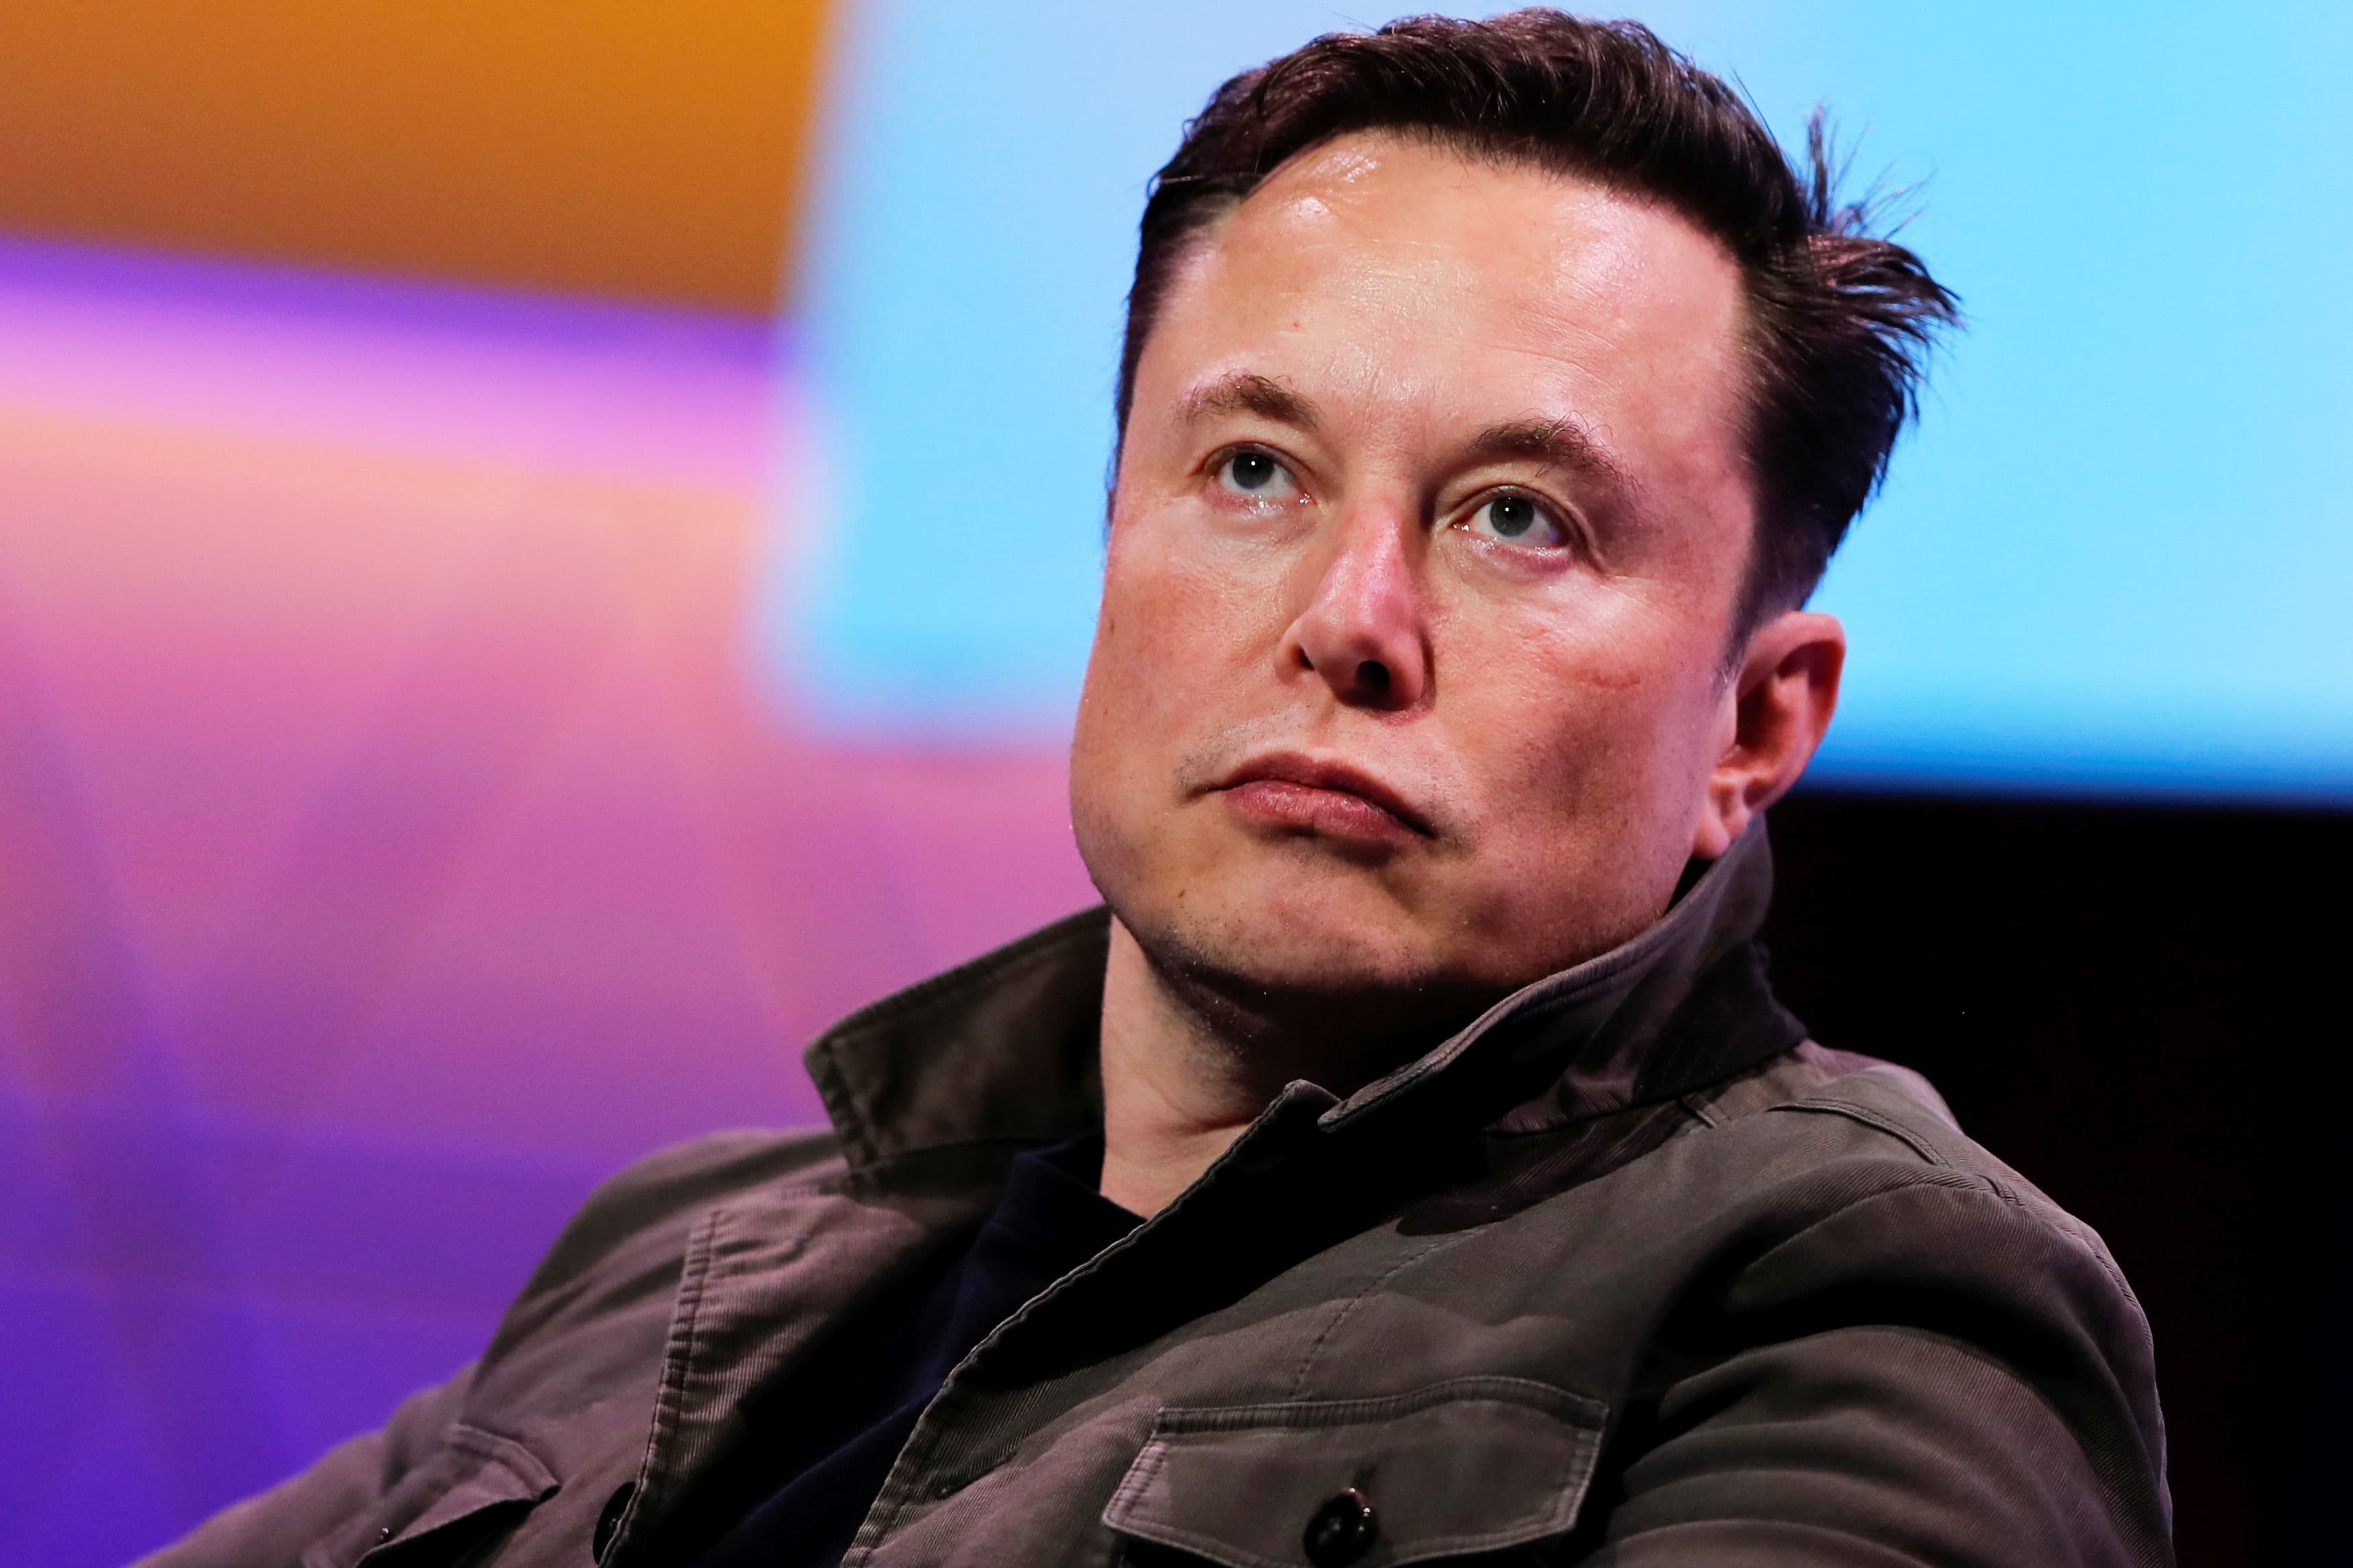 af marked Gylden Here's Why Haters Of Twitter CEO Elon Musk Can't Stand Him